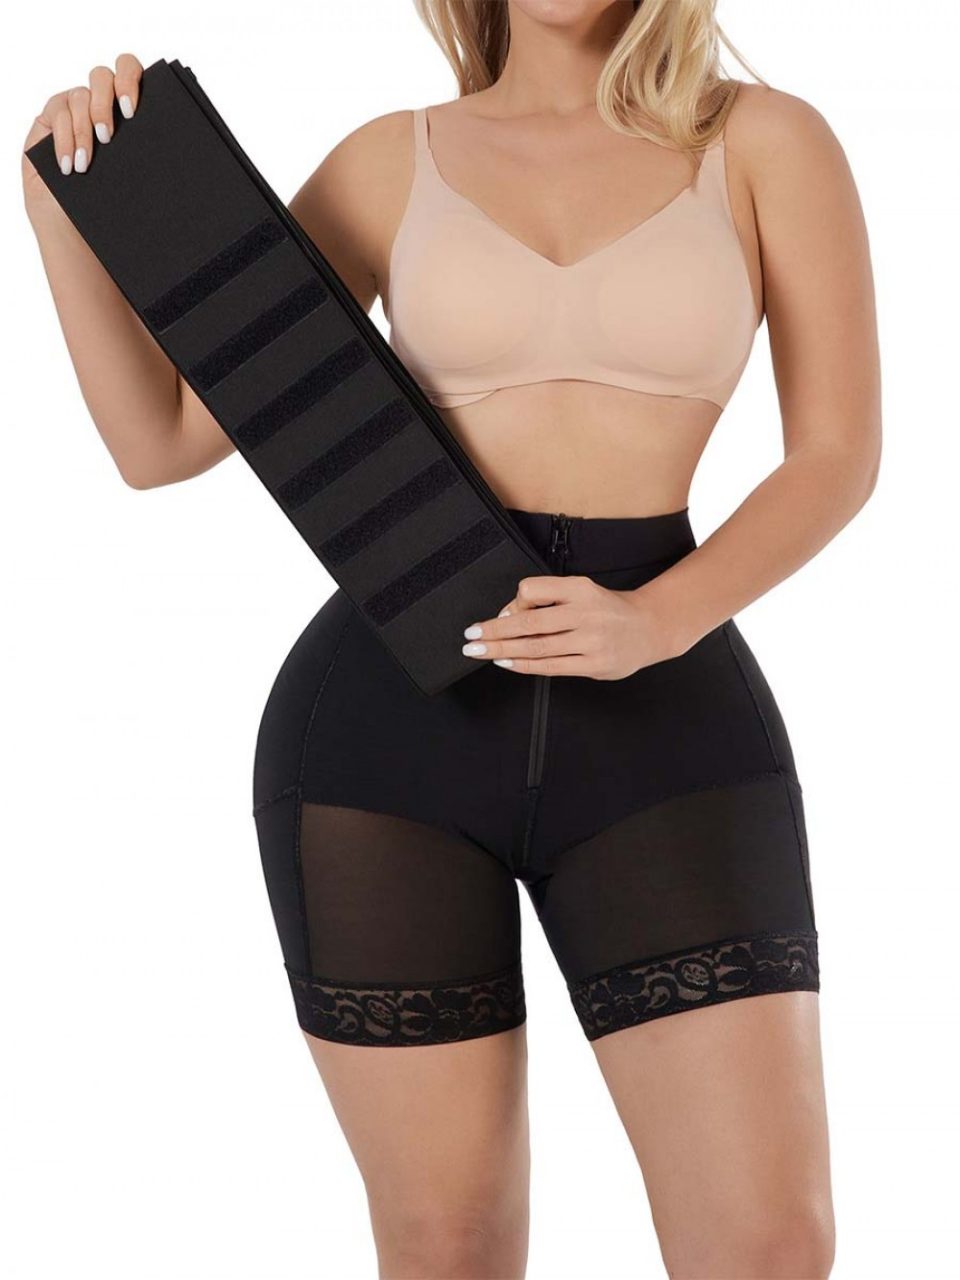 Slimming Shapewear You Need to Know